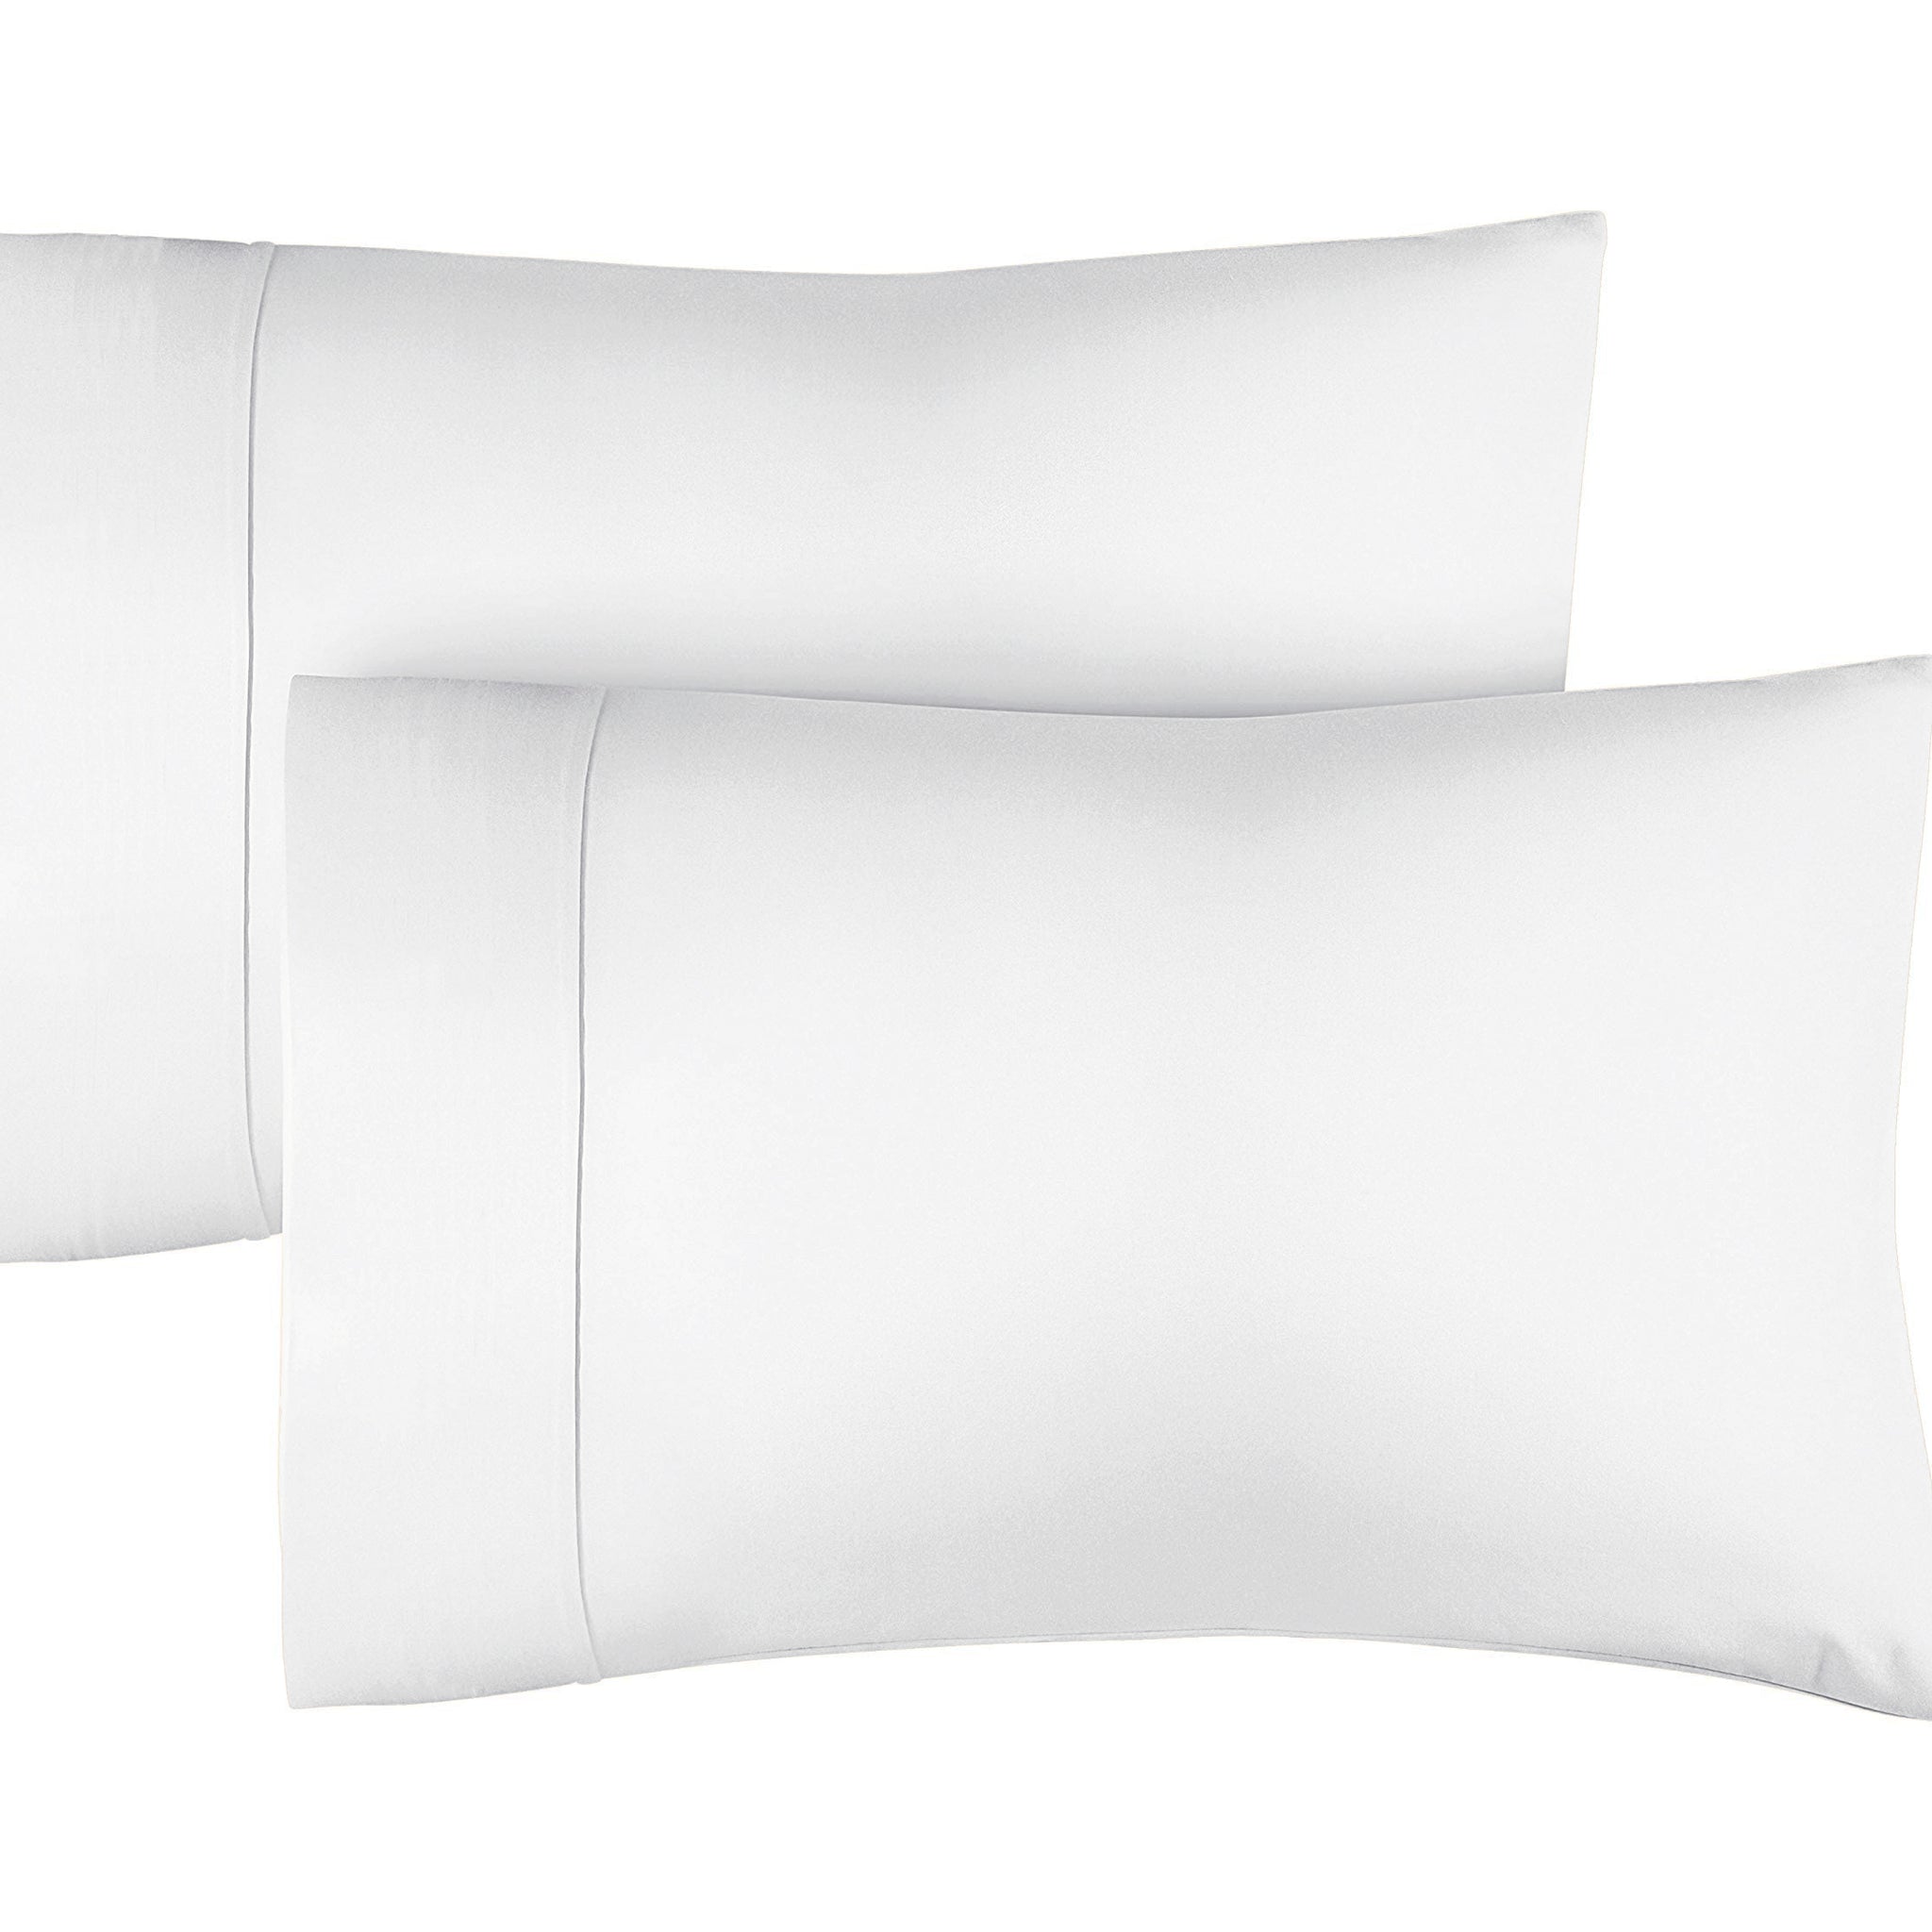 400 Thread Count Wrinkle Free Pillow Cases with Envelope Closure